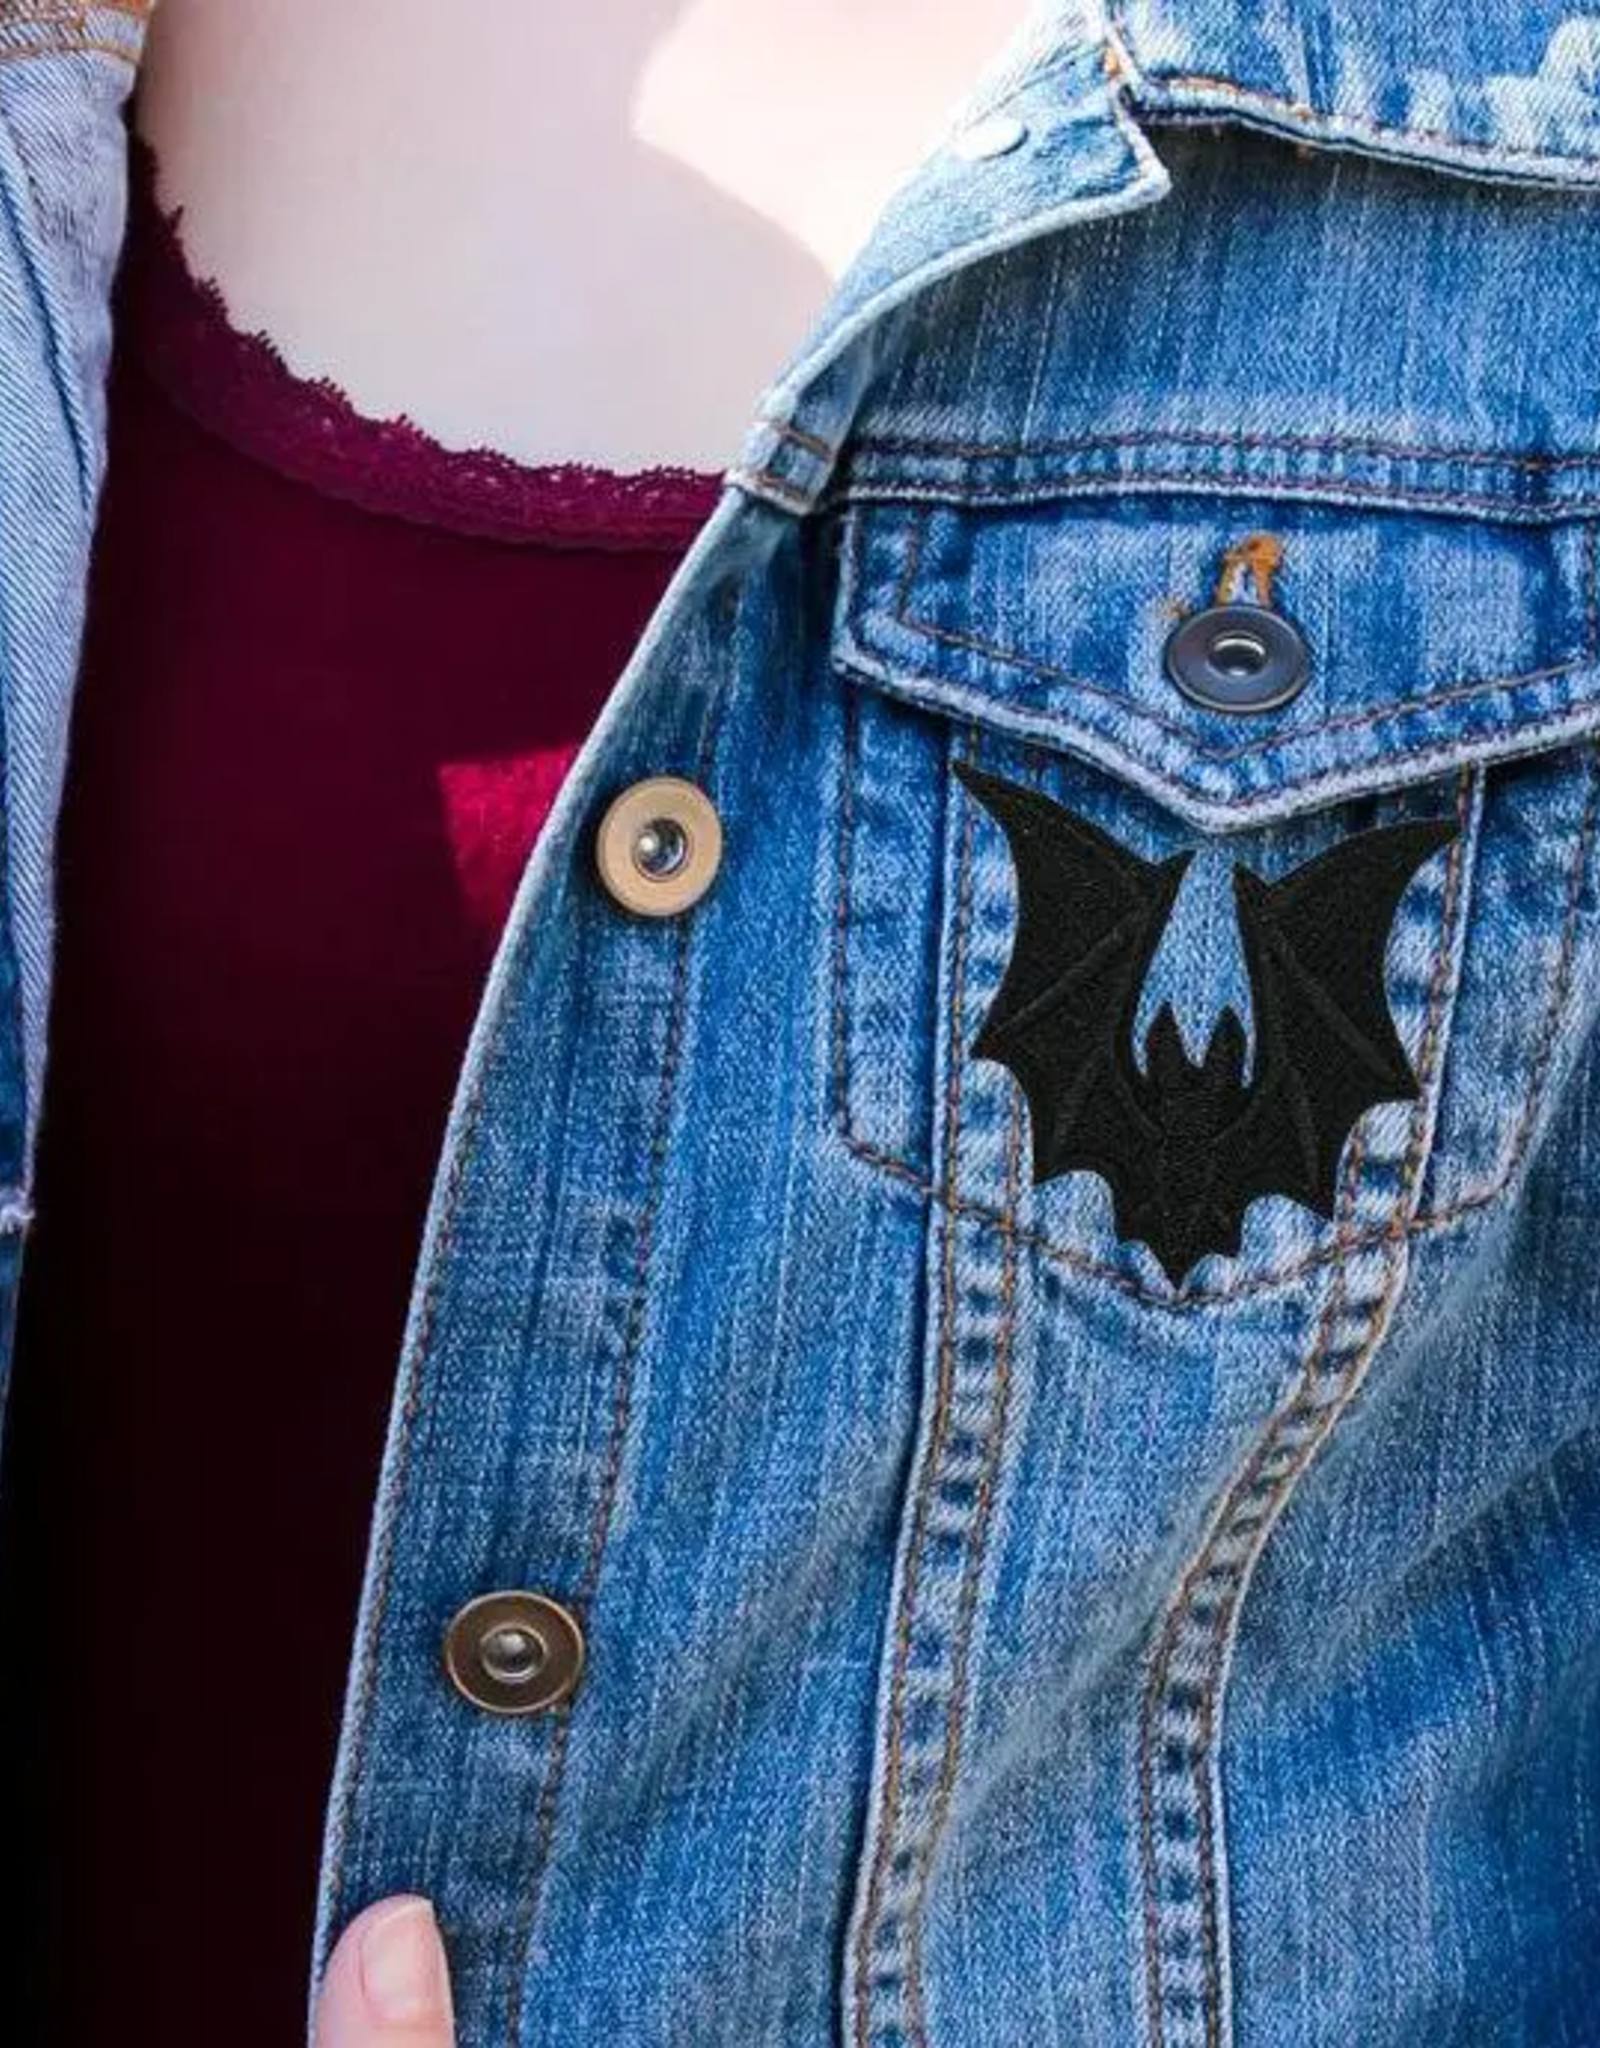 Small Vampire Bat Gothic Iron On Embroidered Patch